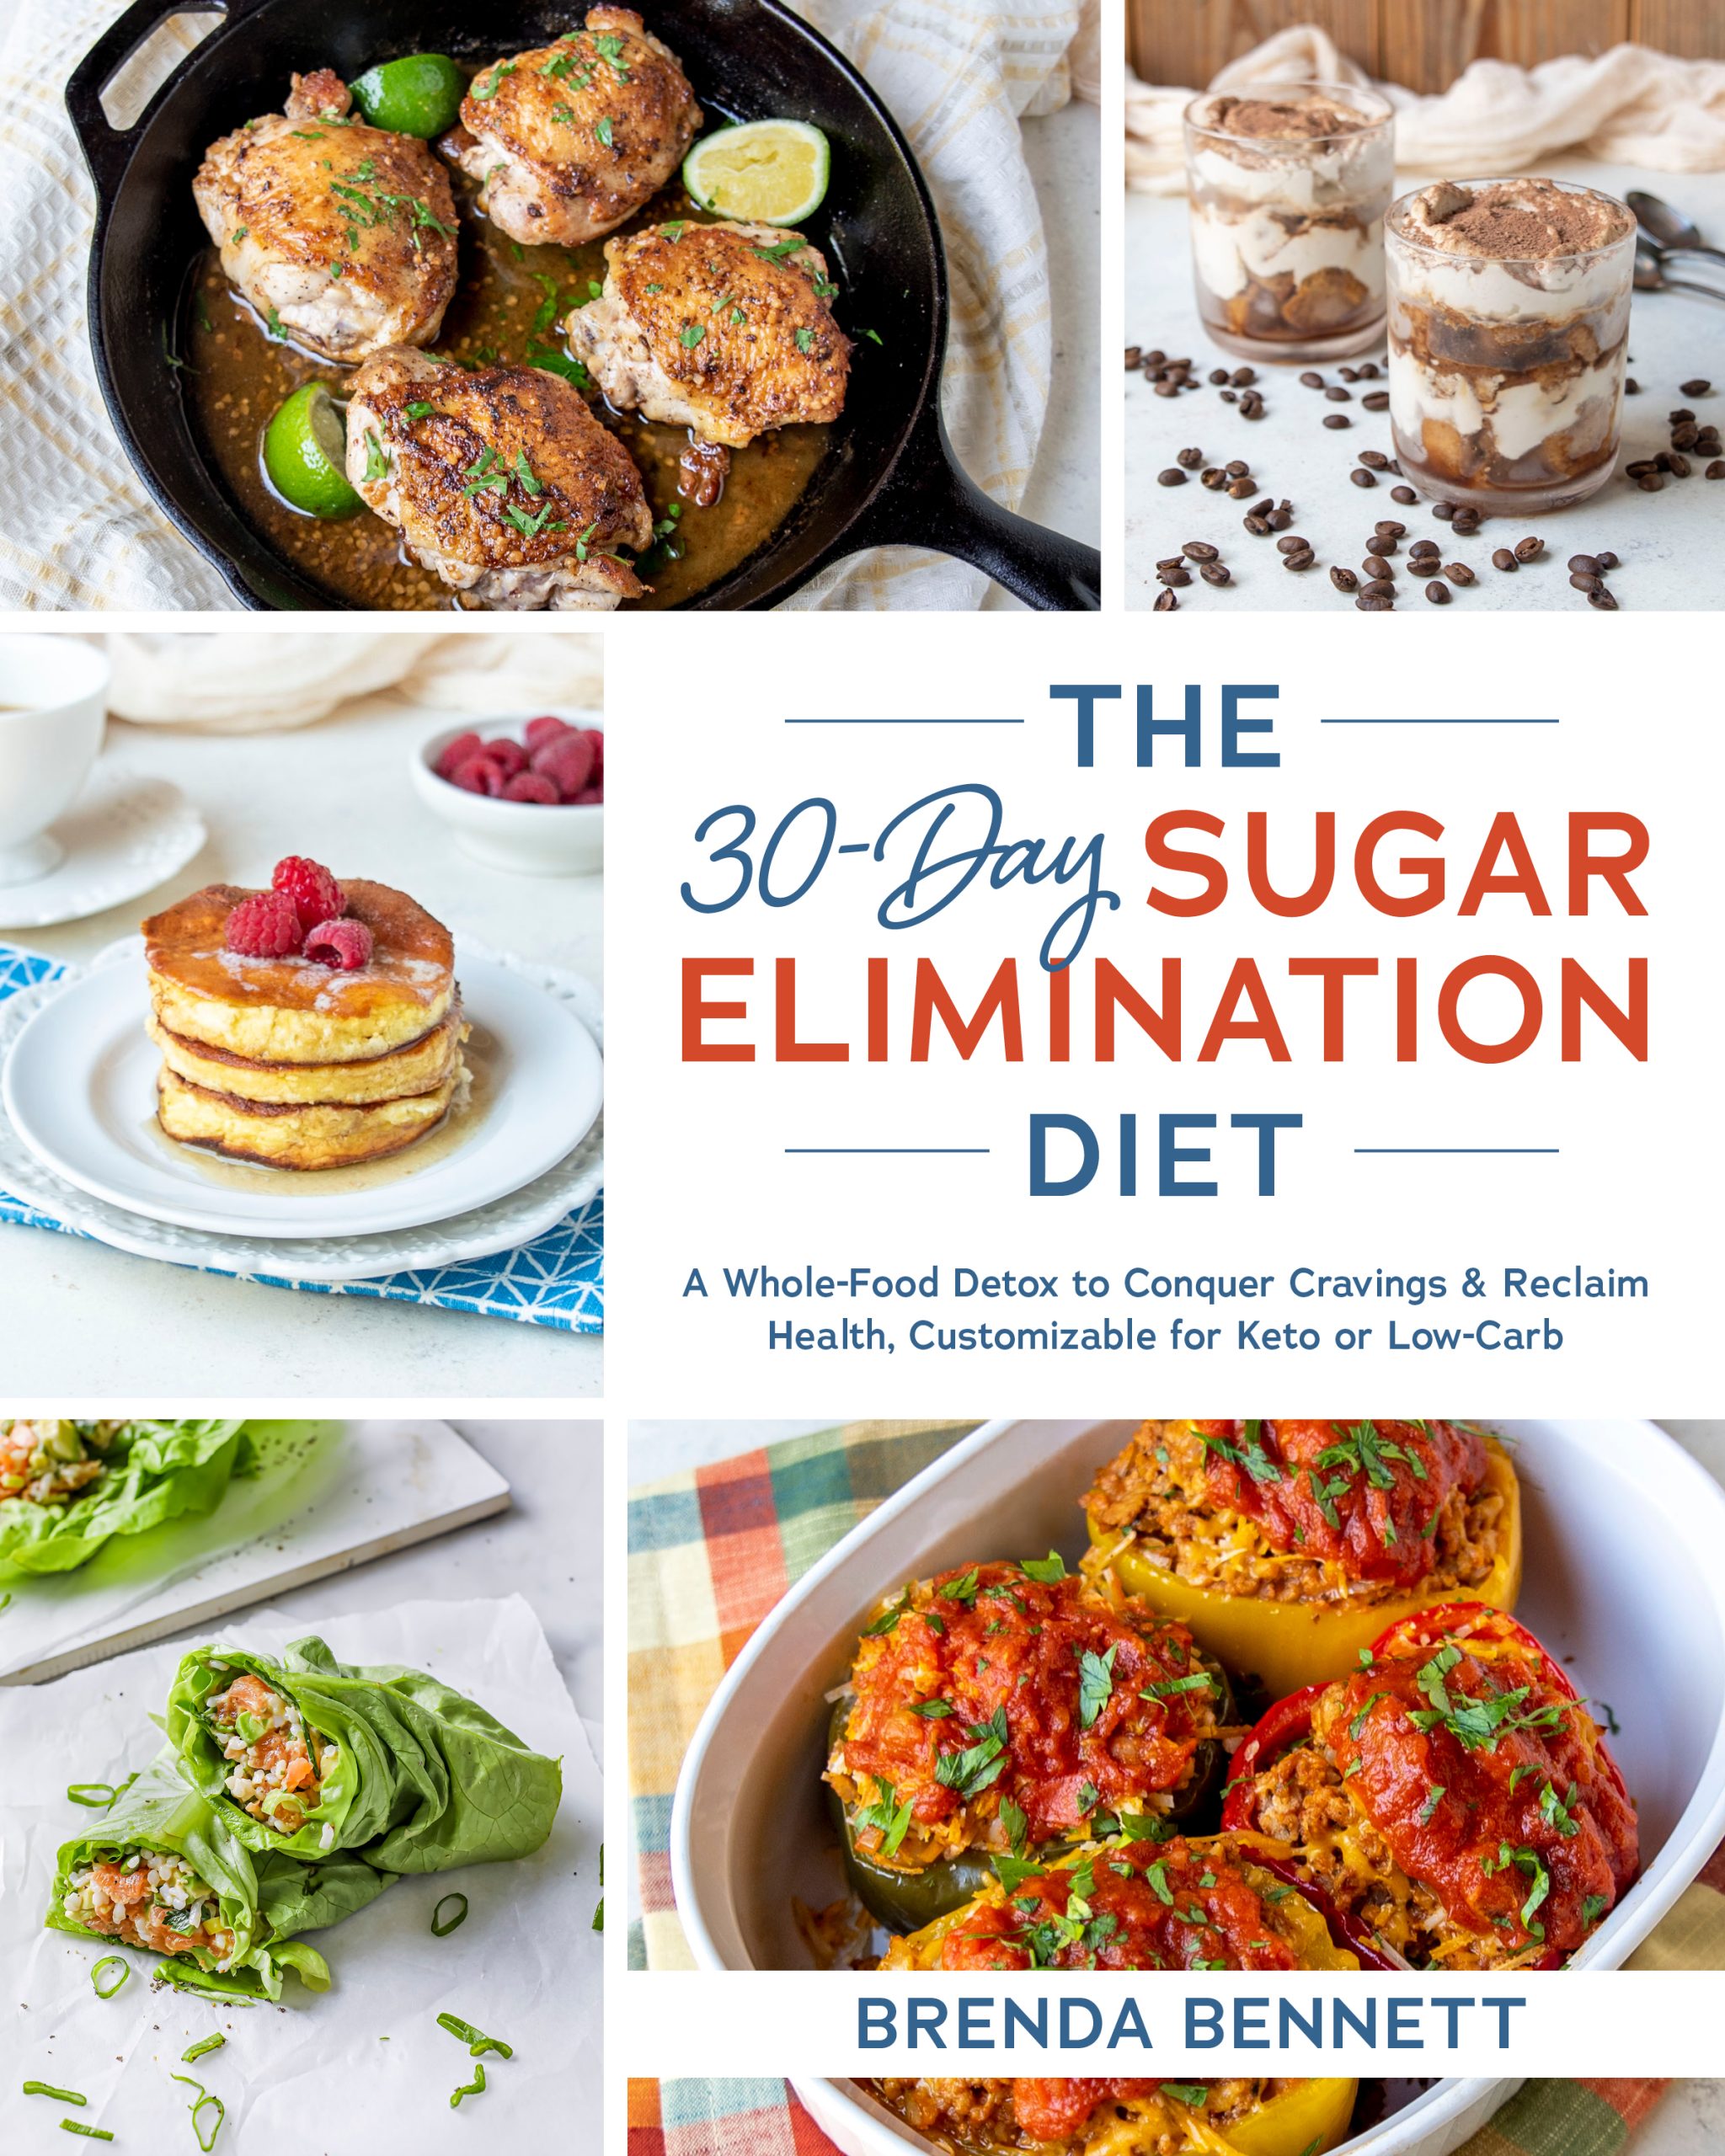 What is The 30-Day Sugar Elimination Diet?